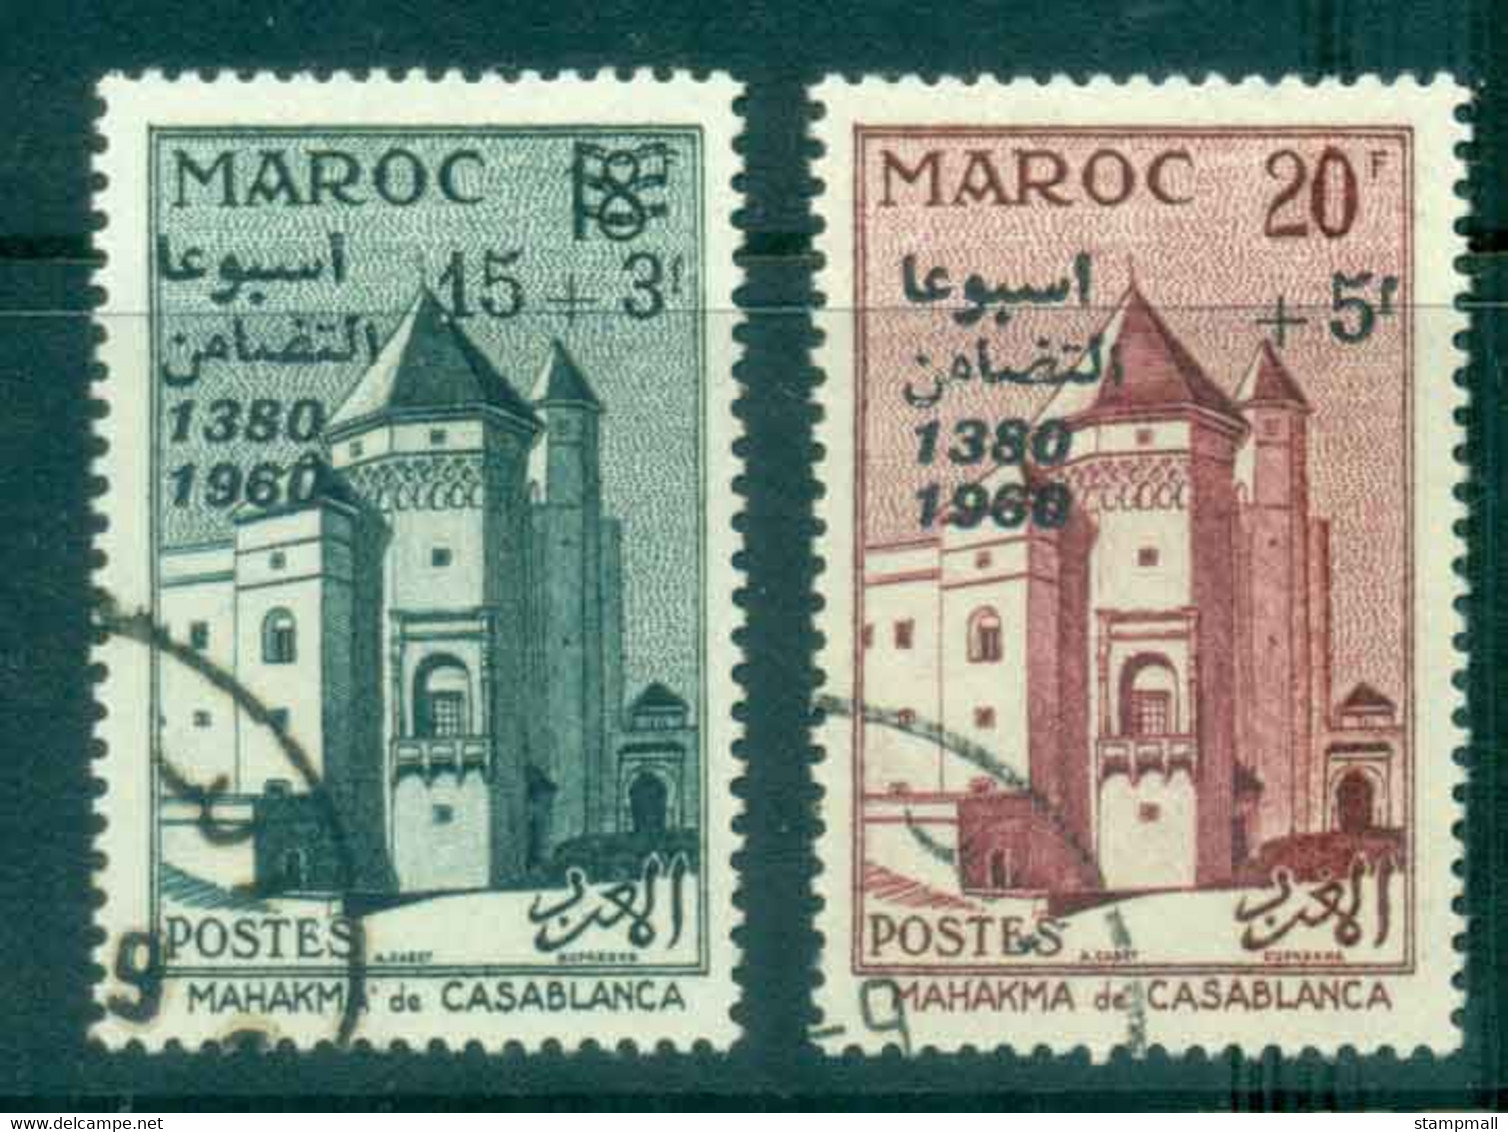 Morocco 1960 Surcharges FU Lot46265 - Morocco (1956-...)